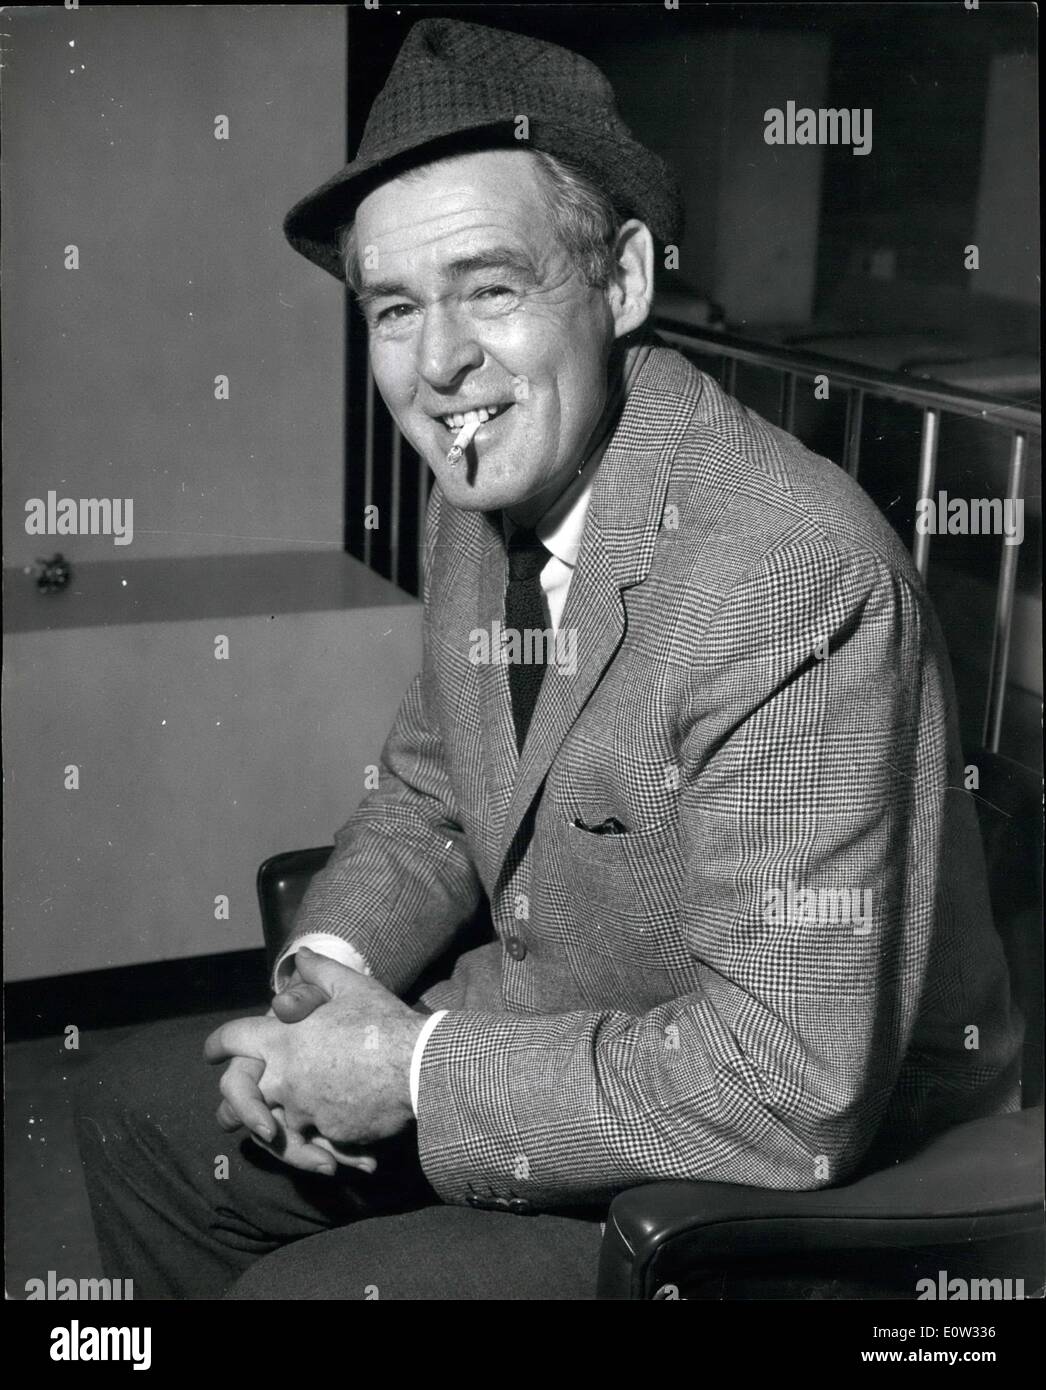 May 05, 1961 - Hollywood Screen Star Robert Ryan arrives in London. American screen star Robert Ryan arrived in London yesterday for a short stay before going on to Spain to make Billy Budd with Peter Ustinov. Robert Ryan is co-chairman of the Committee for a Sane Nuclear Policy, equivalent to the Campaign for Nuclear Disarmament. Keystone Photo Shows: Robert Ryan on his arrival in London yesterday. JSS/Keystone Stock Photo